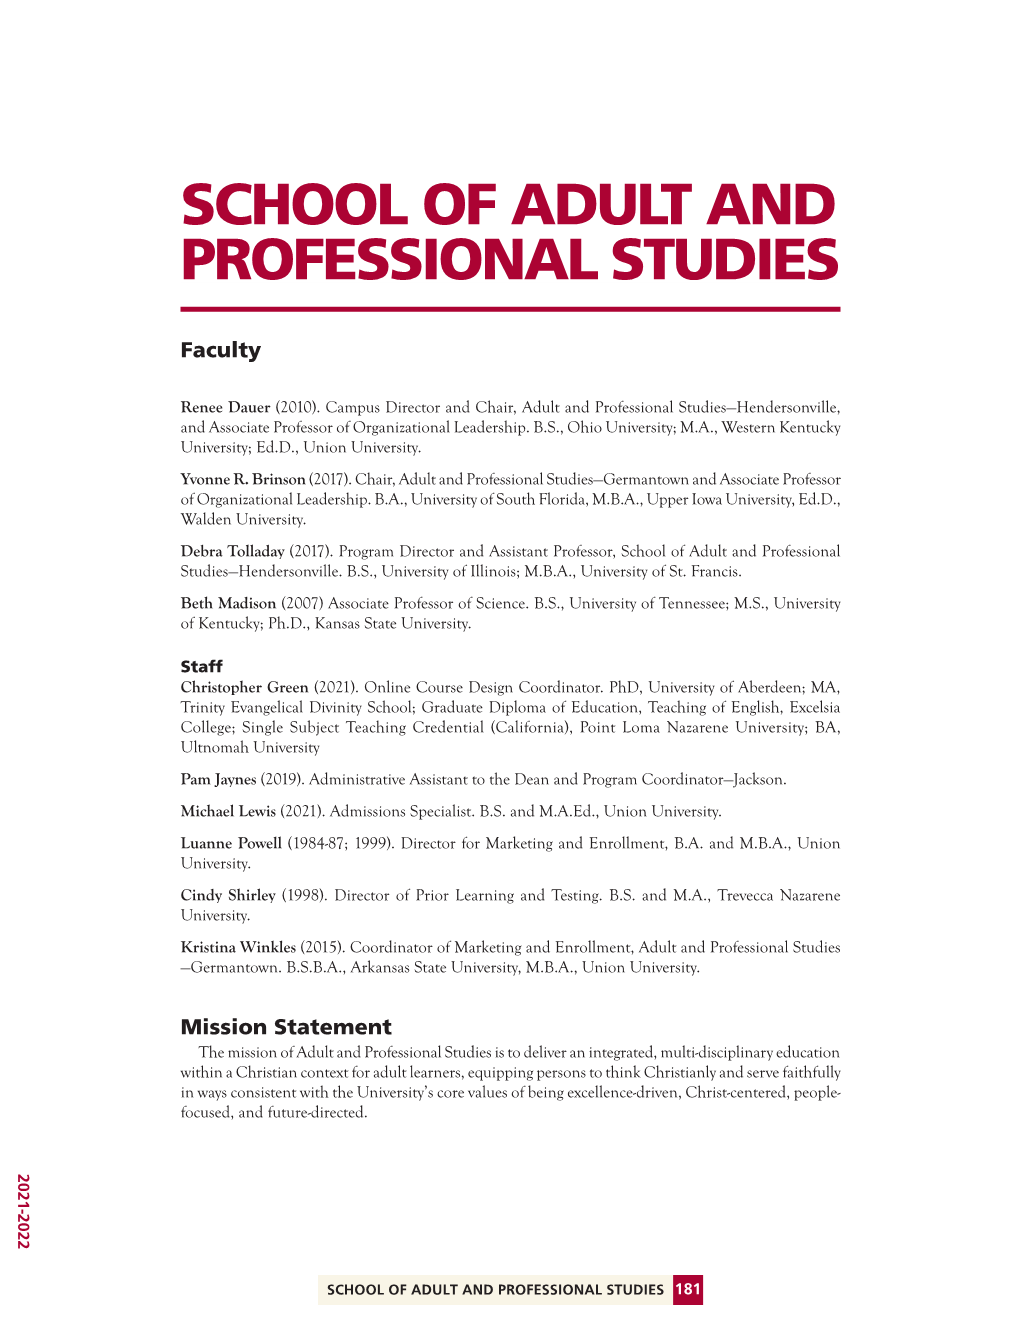 School of Adult and Professional Studies